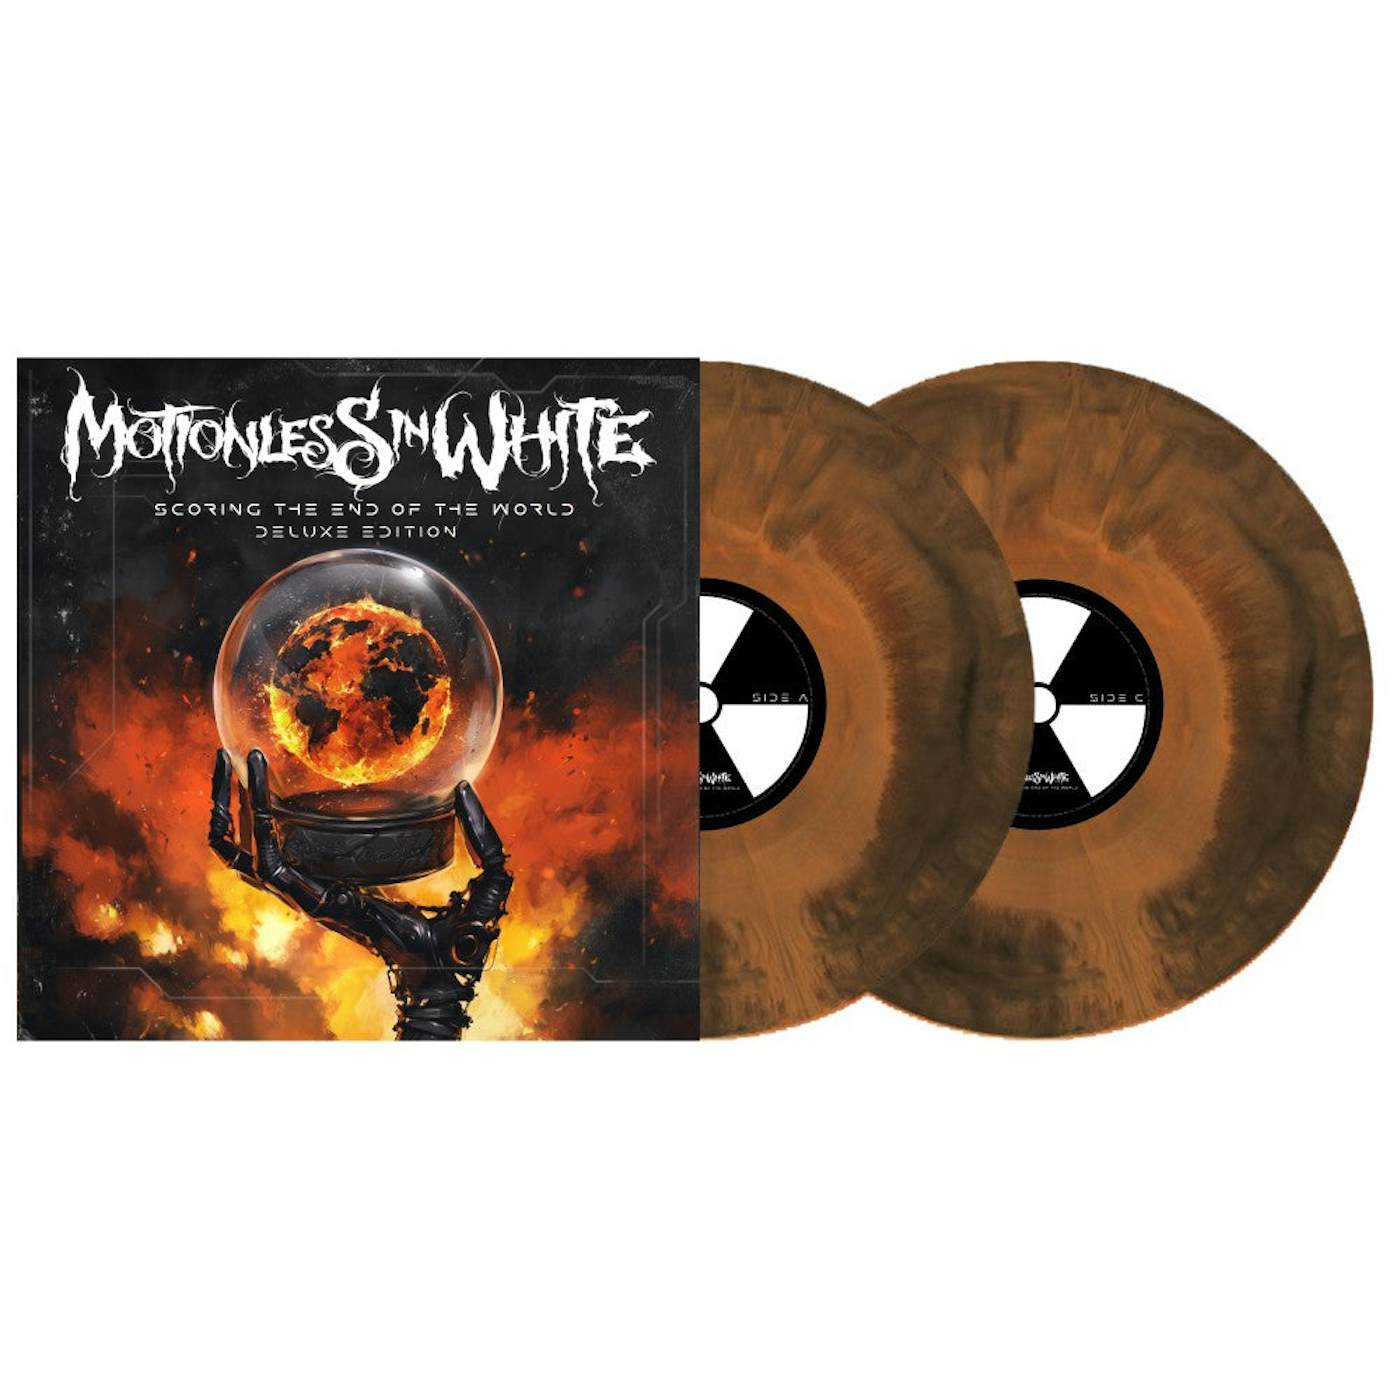 Motionless In White Scoring The End Of The World (Deluxe) Opaque Galaxy Tangerine and Black Vinyl